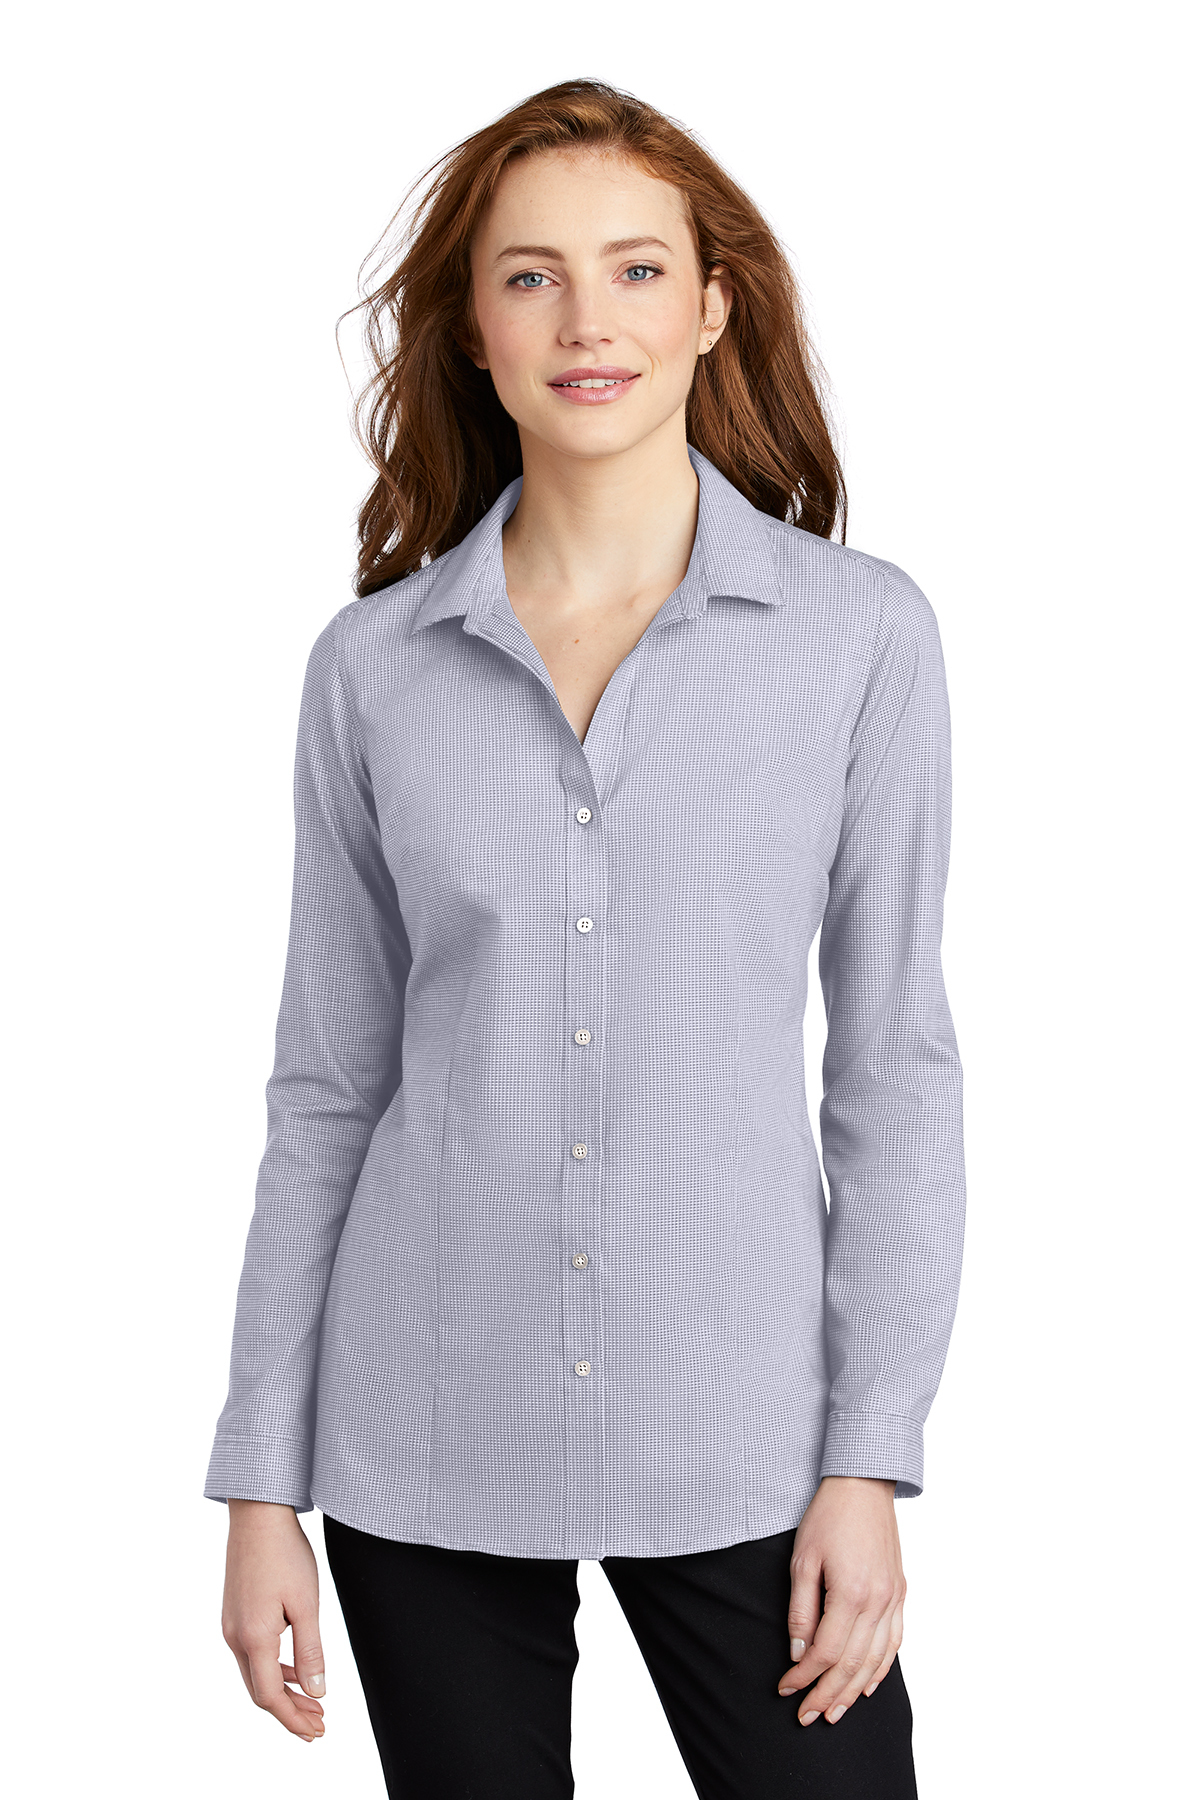 Port Authority LW645 - Ladies Pincheck Easy Care Shirt